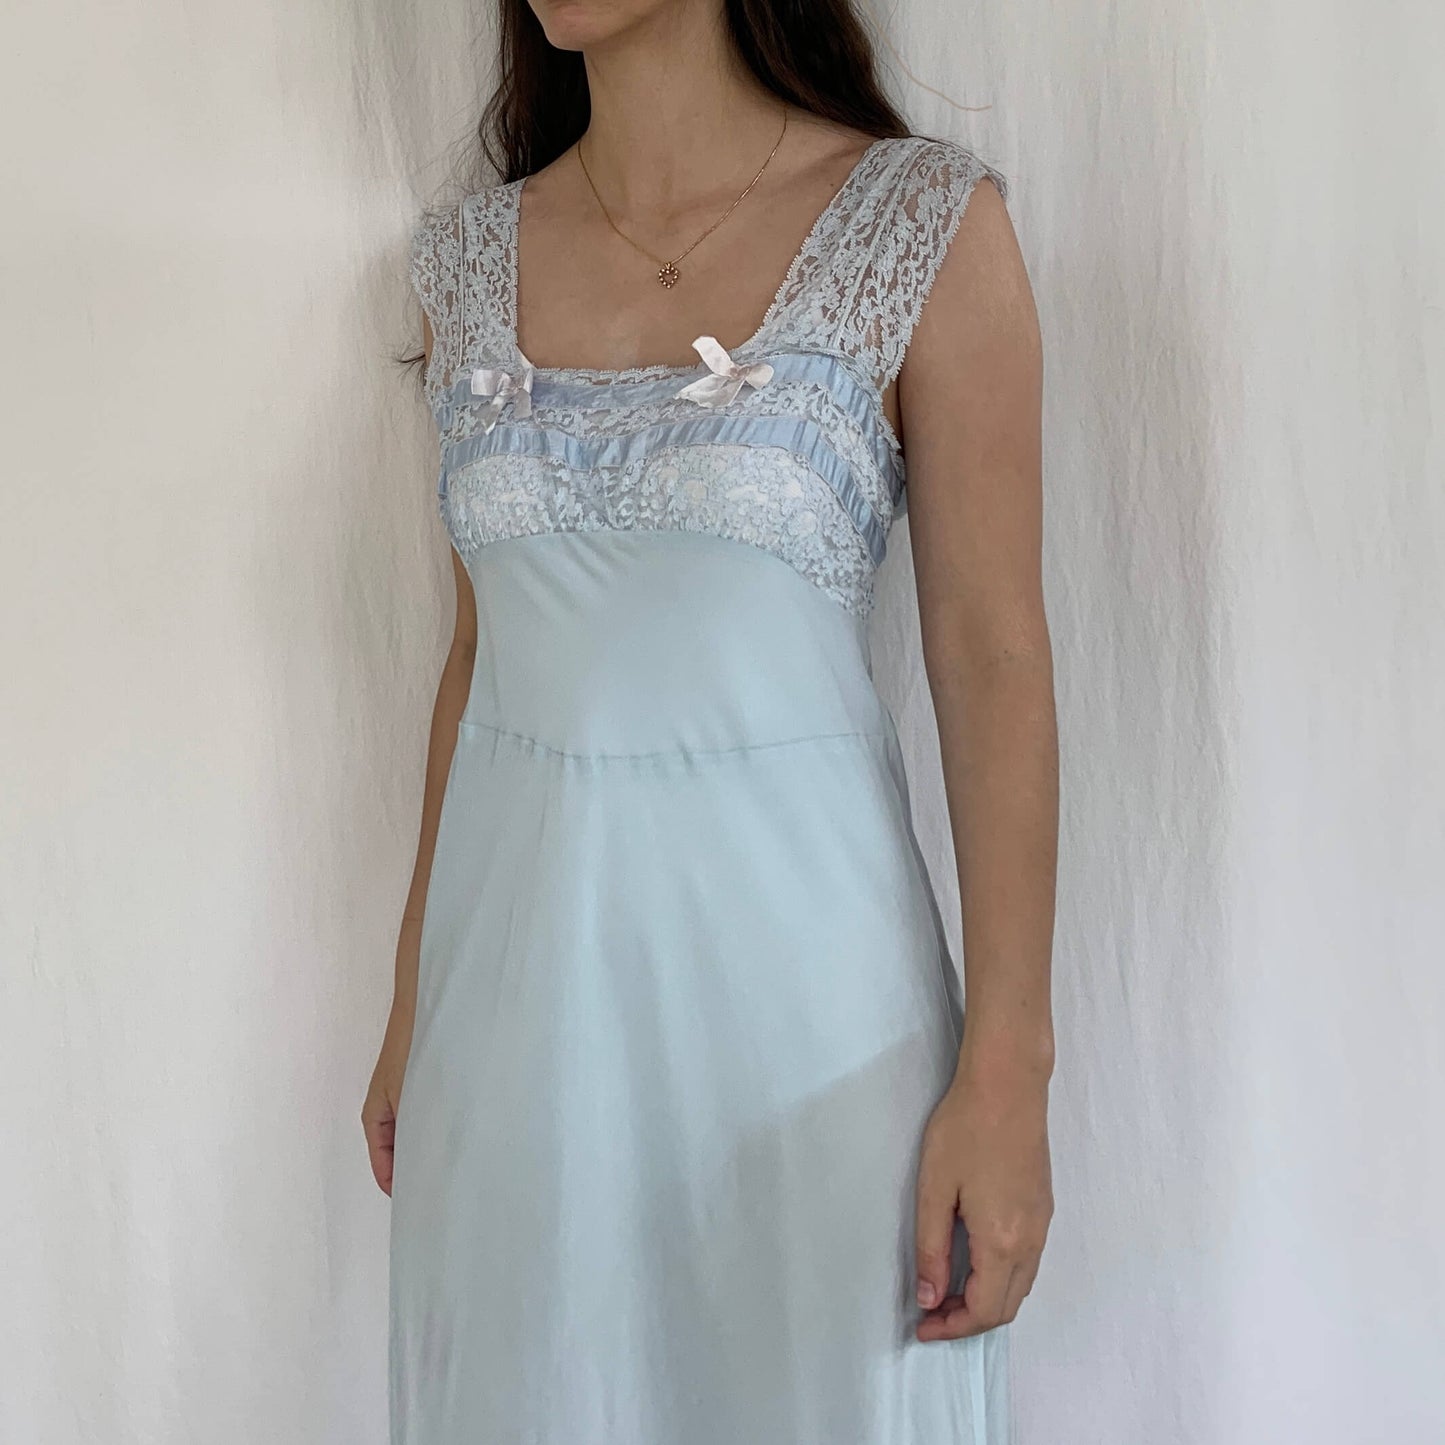 Vintage 1930s bias cut dress in light blue rayon with lace bodice